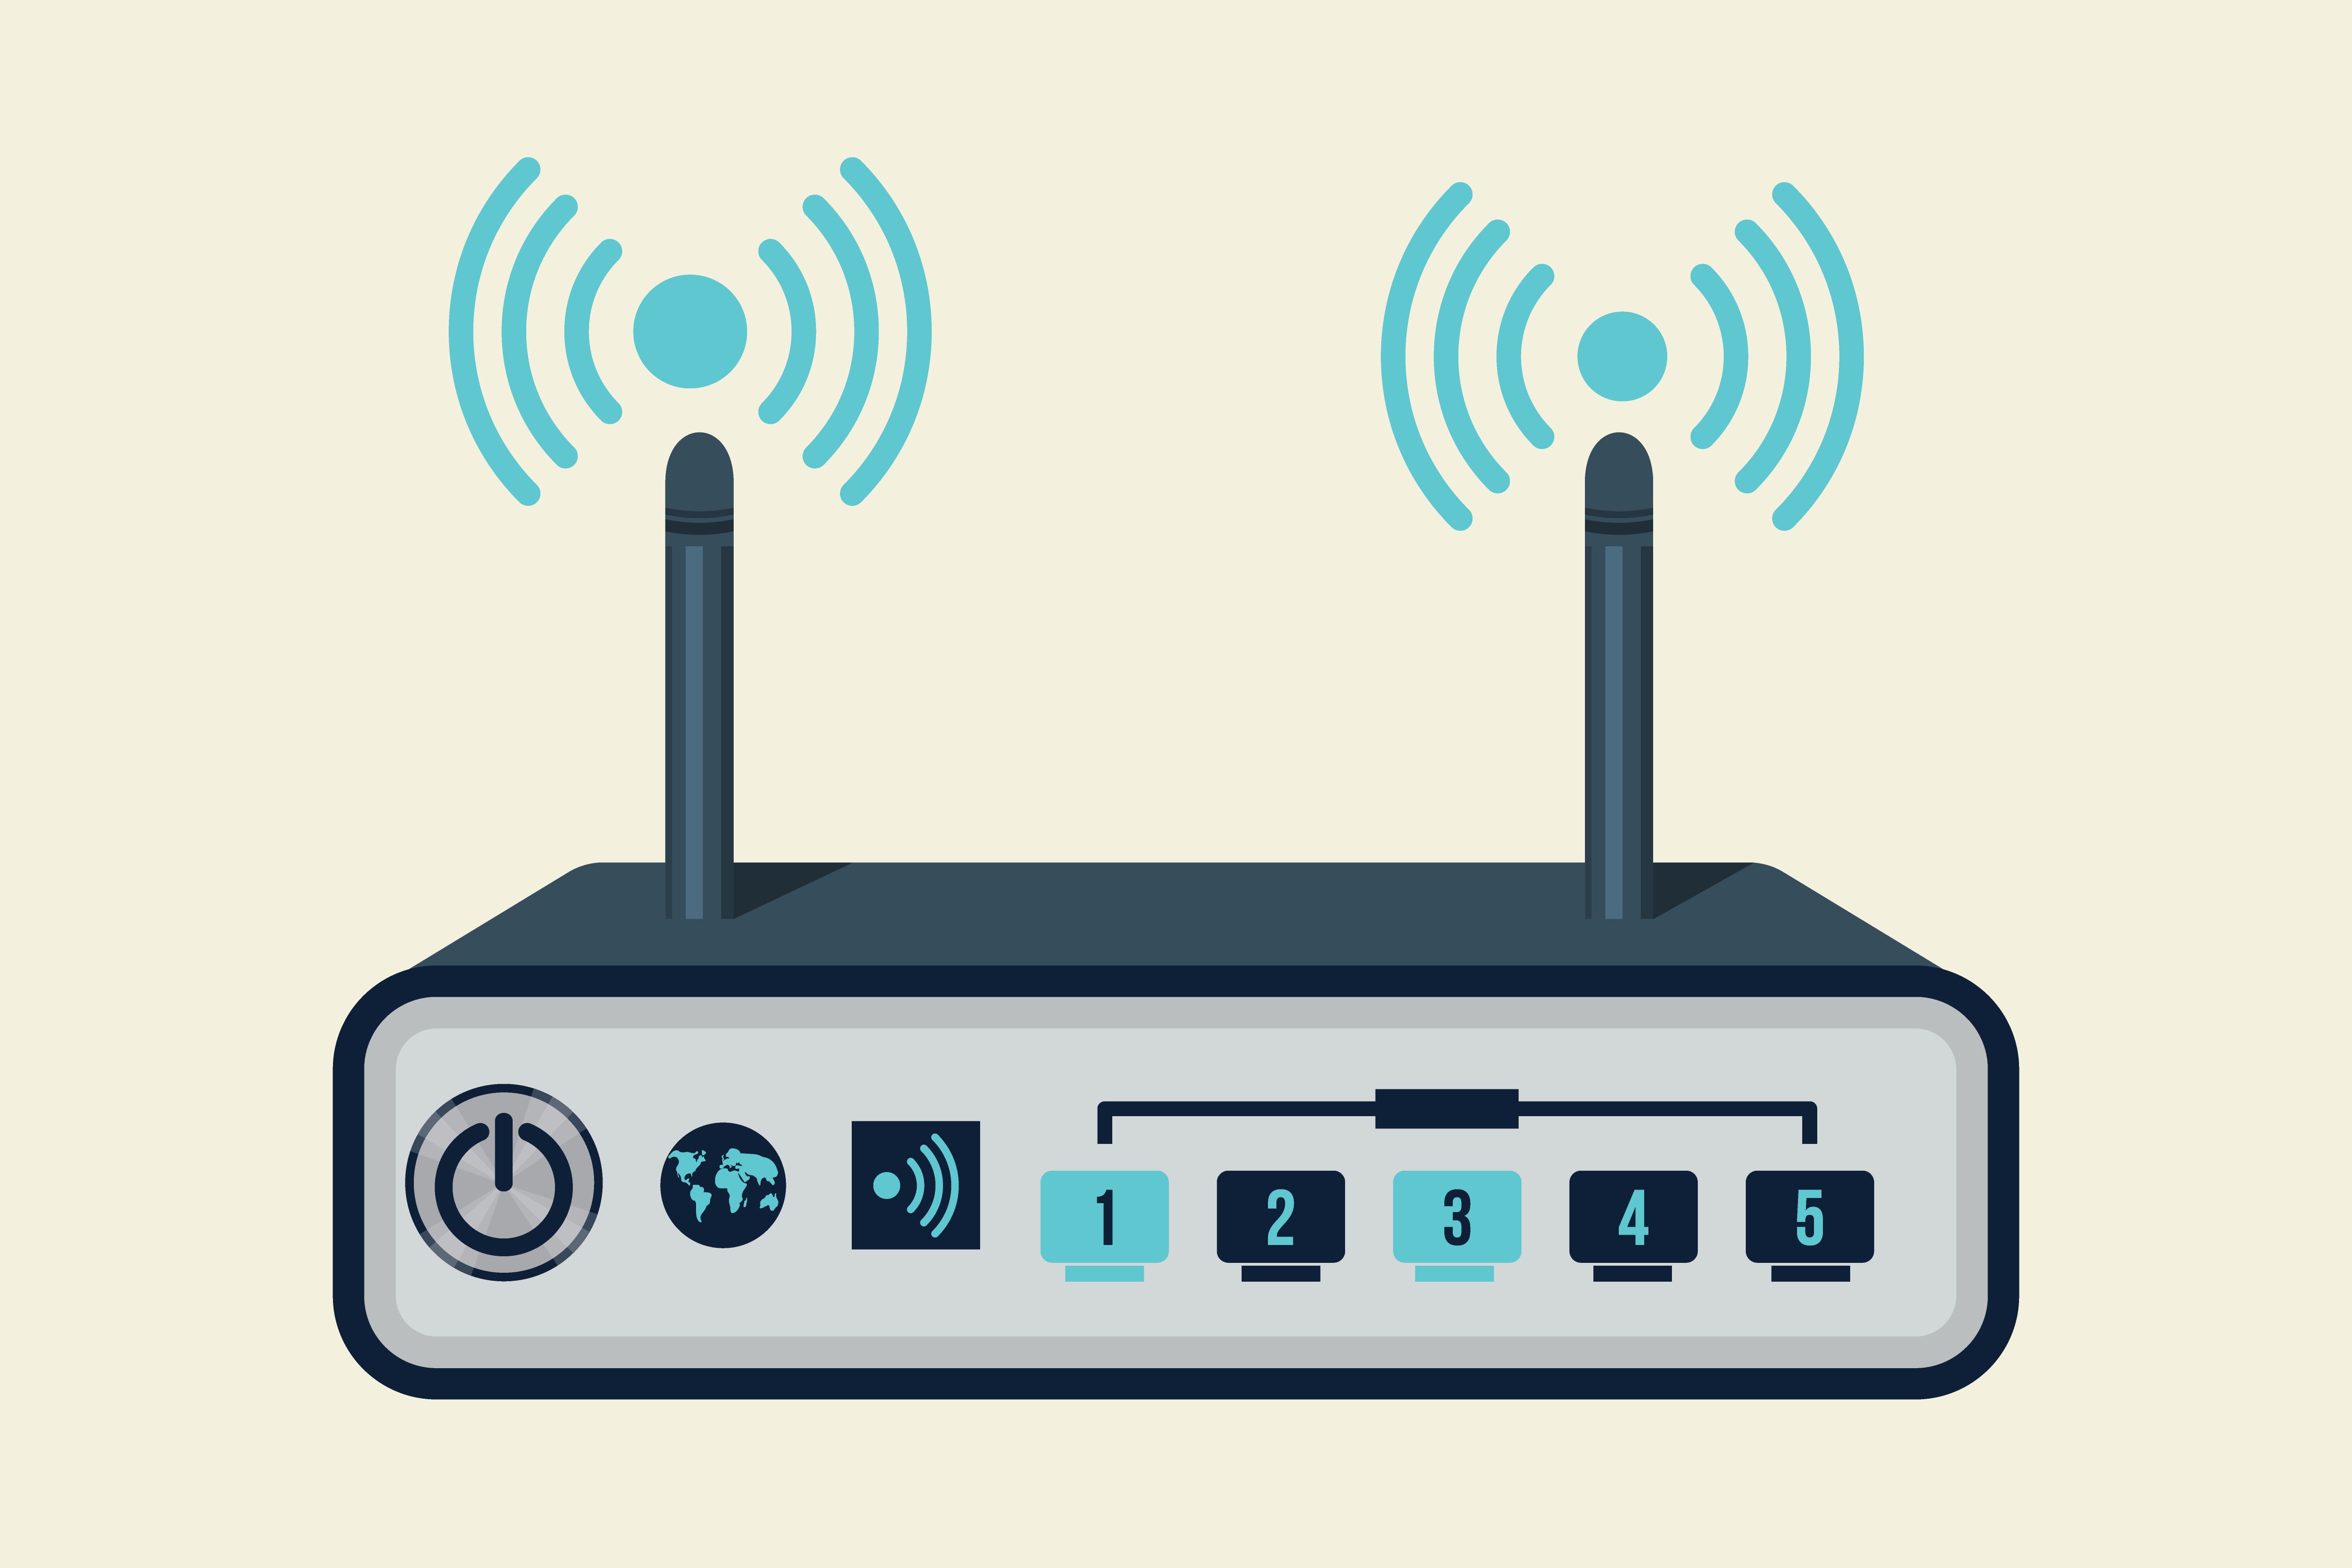 How to Set Up a Home Network Router